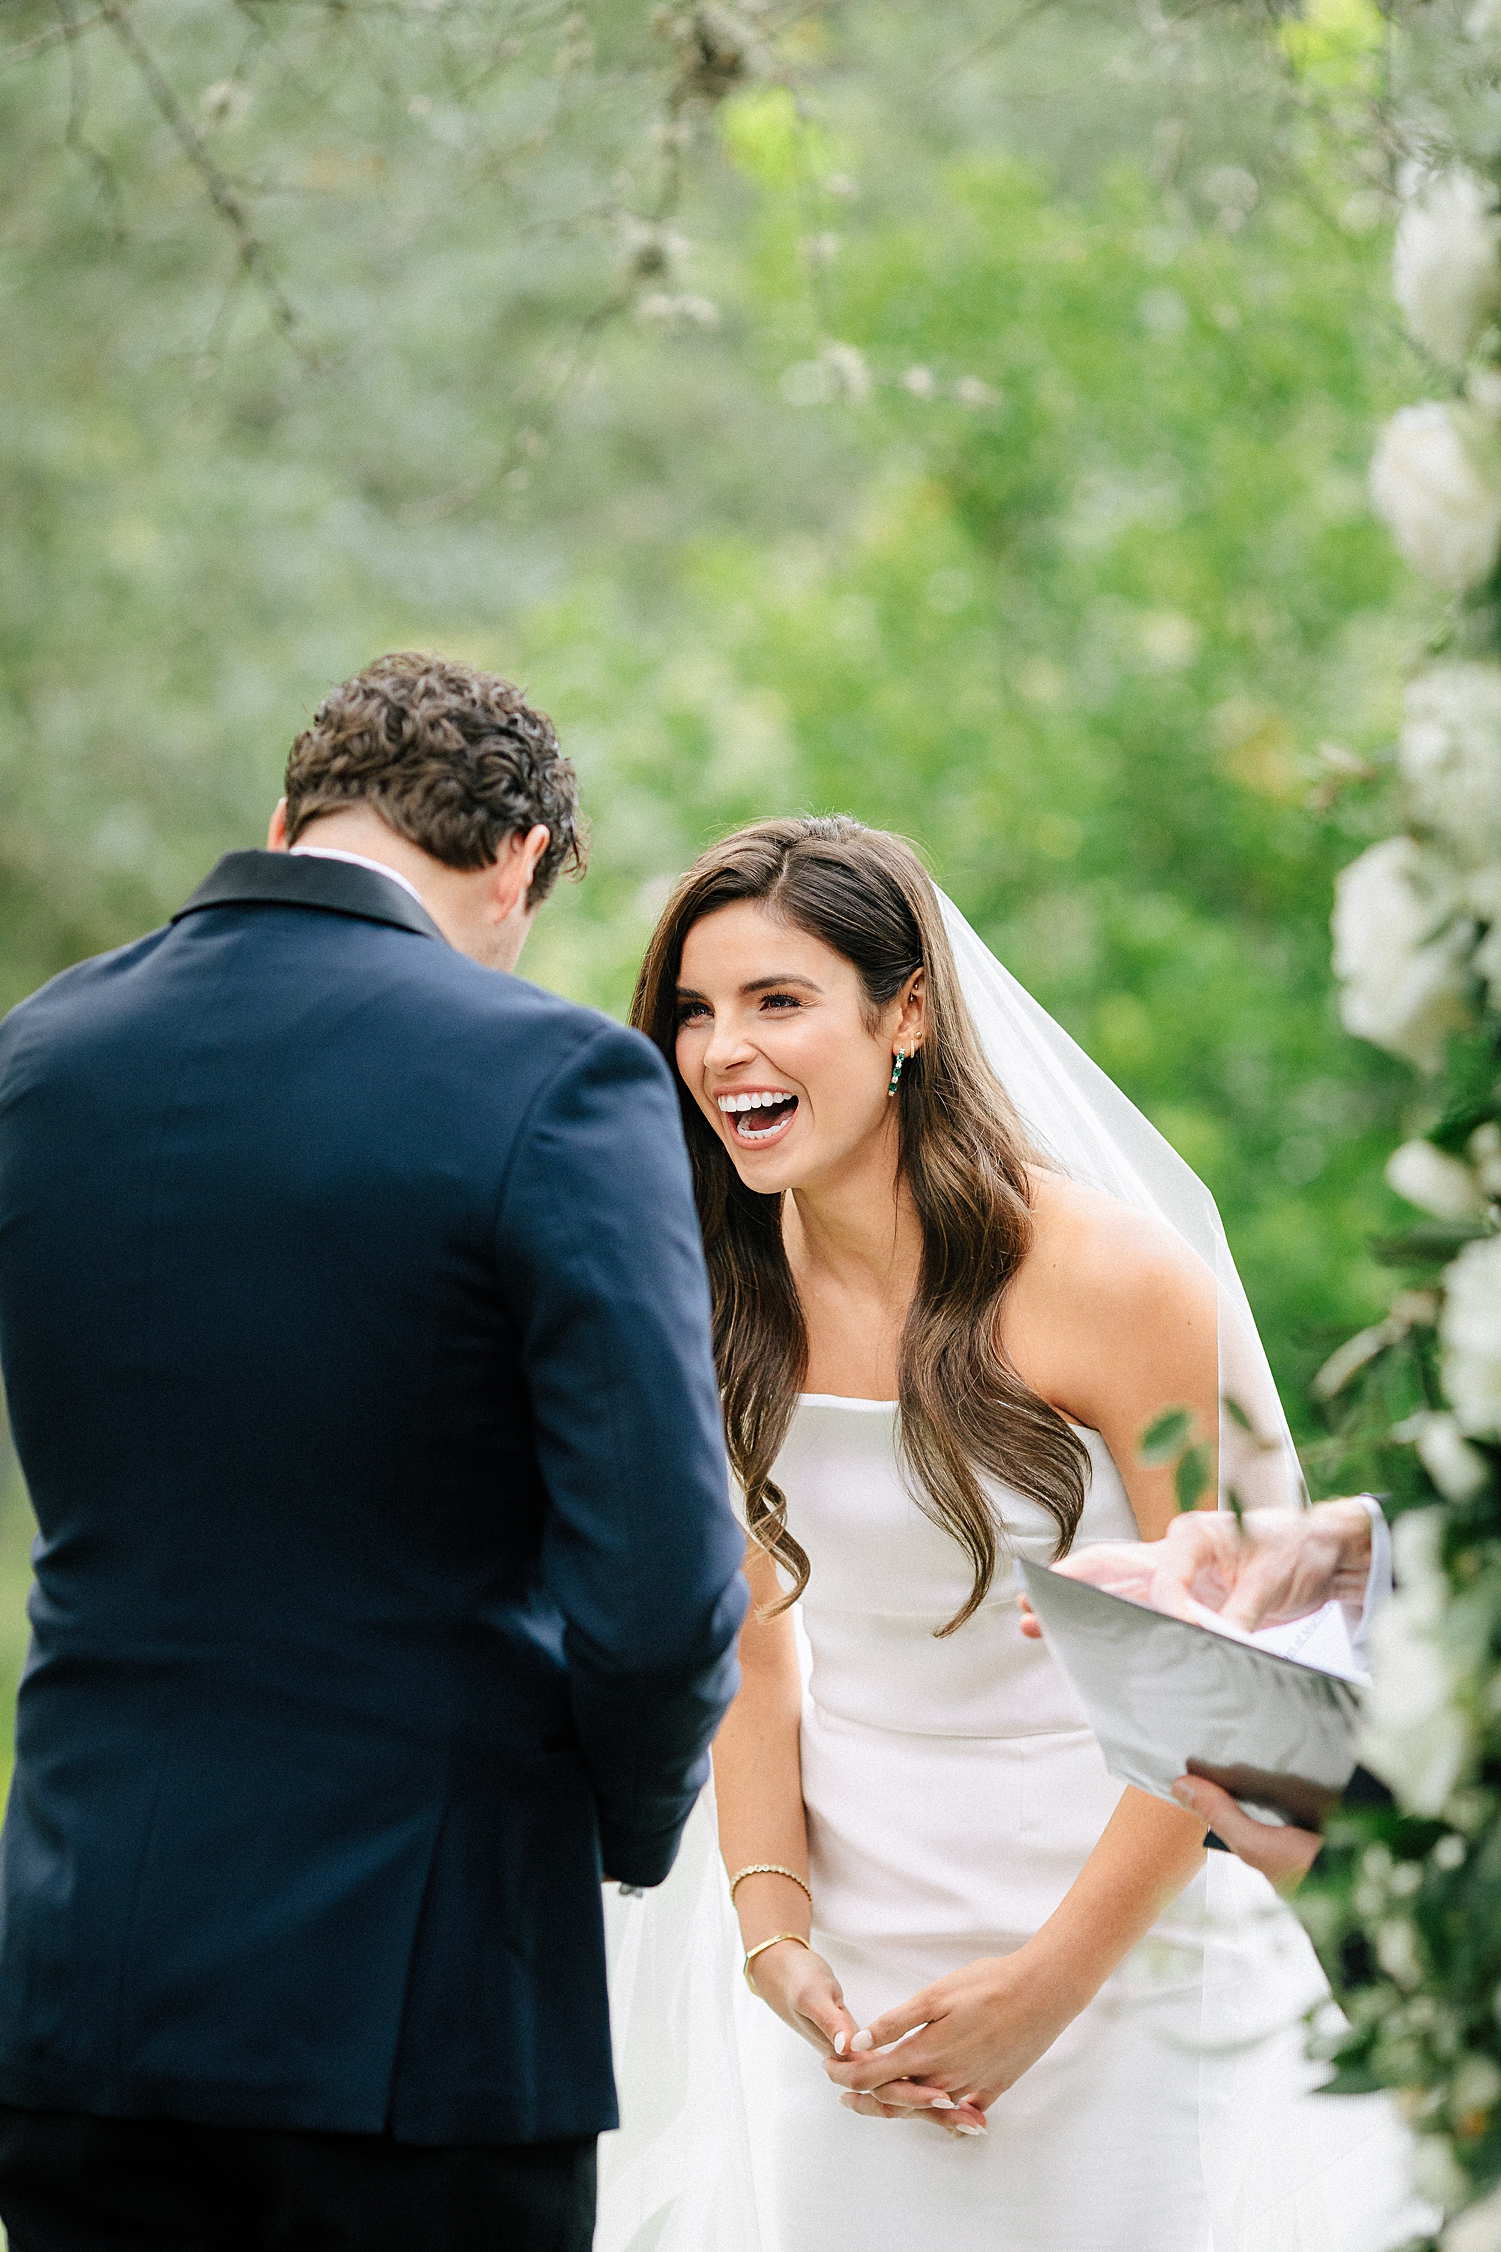 Bride laughing at groom in navy tuxedo at ceremony altar strapless dress